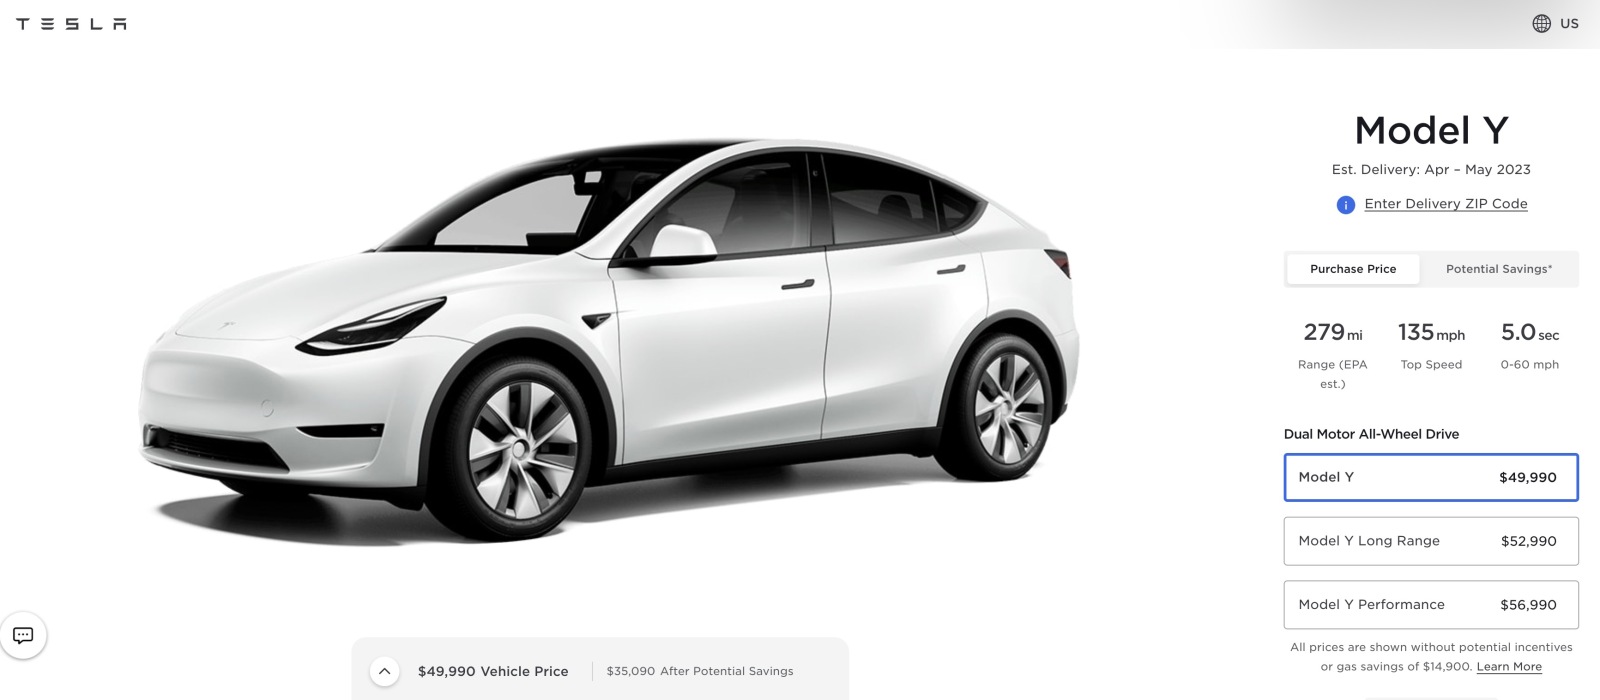 Tesla Model Y prices April 2023 - Tesla Surprises the Market with Series of Price Reductions on Entire Car Lineup to Keep Up with Competition